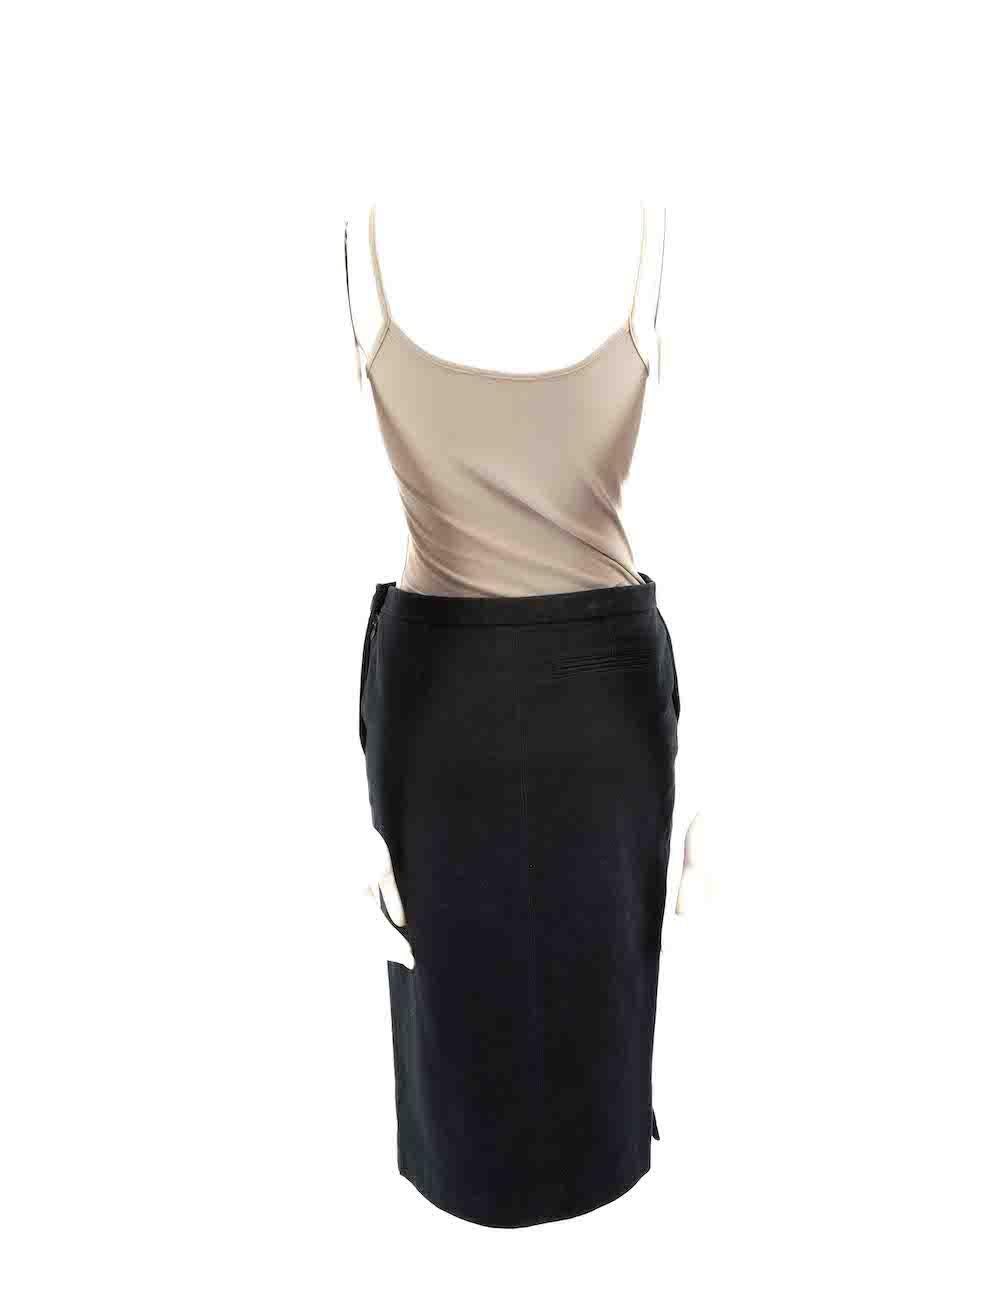 Balenciaga Black Cotton Knee Length Pencil Skirt Size S In Good Condition For Sale In London, GB